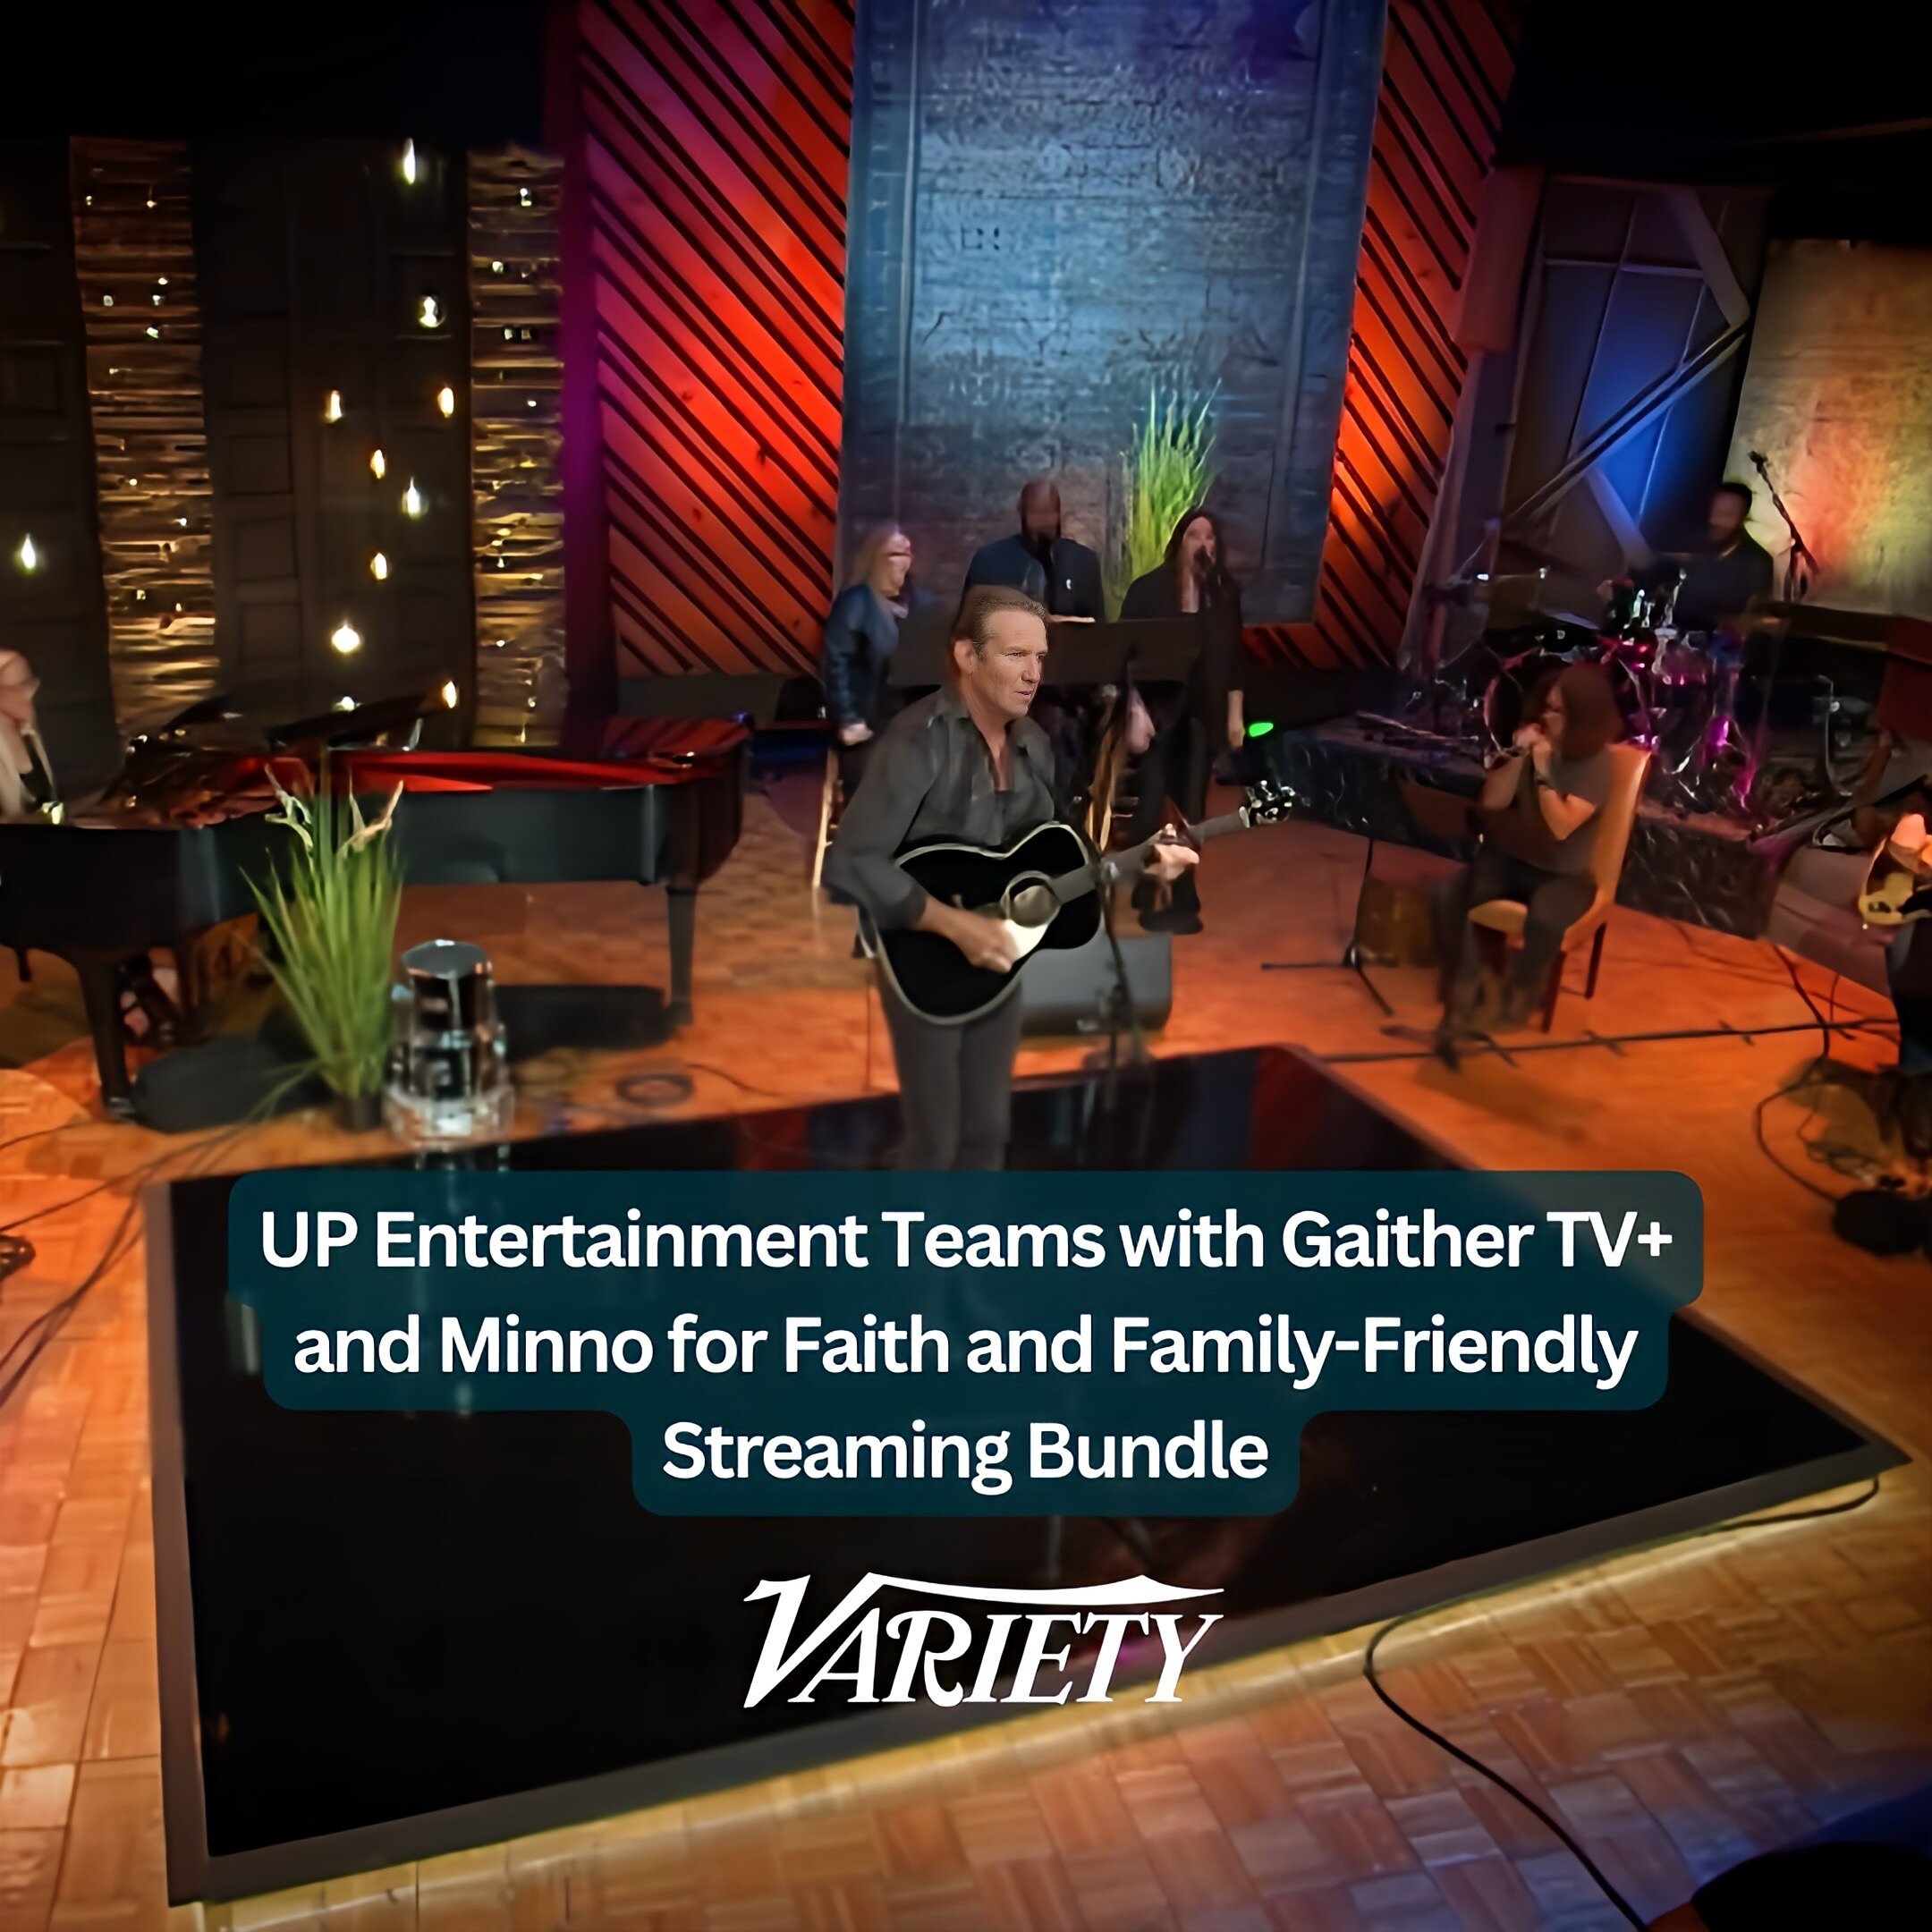 Thanks to Cynthia Littleton @variety for speaking with @up_tv founder and CEO, Charles &lsquo;Charley&rsquo; Humbard, about the new @upfaithandfamily streaming bundle and 20 years of independent Uplifting television.

&ldquo;In another sign of how th